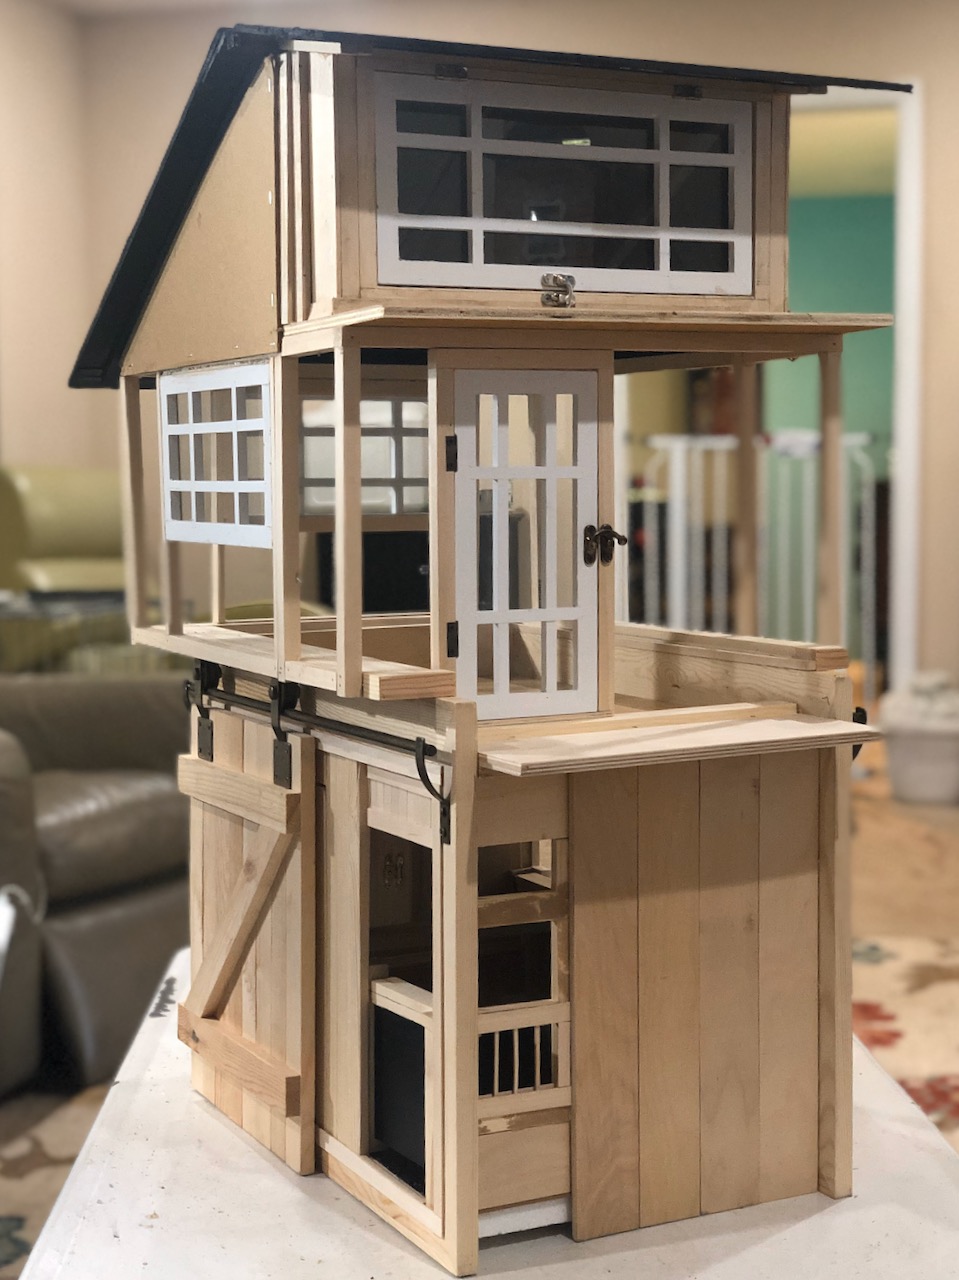 Dollhouse Barn Apartment with roof and eaves installed.